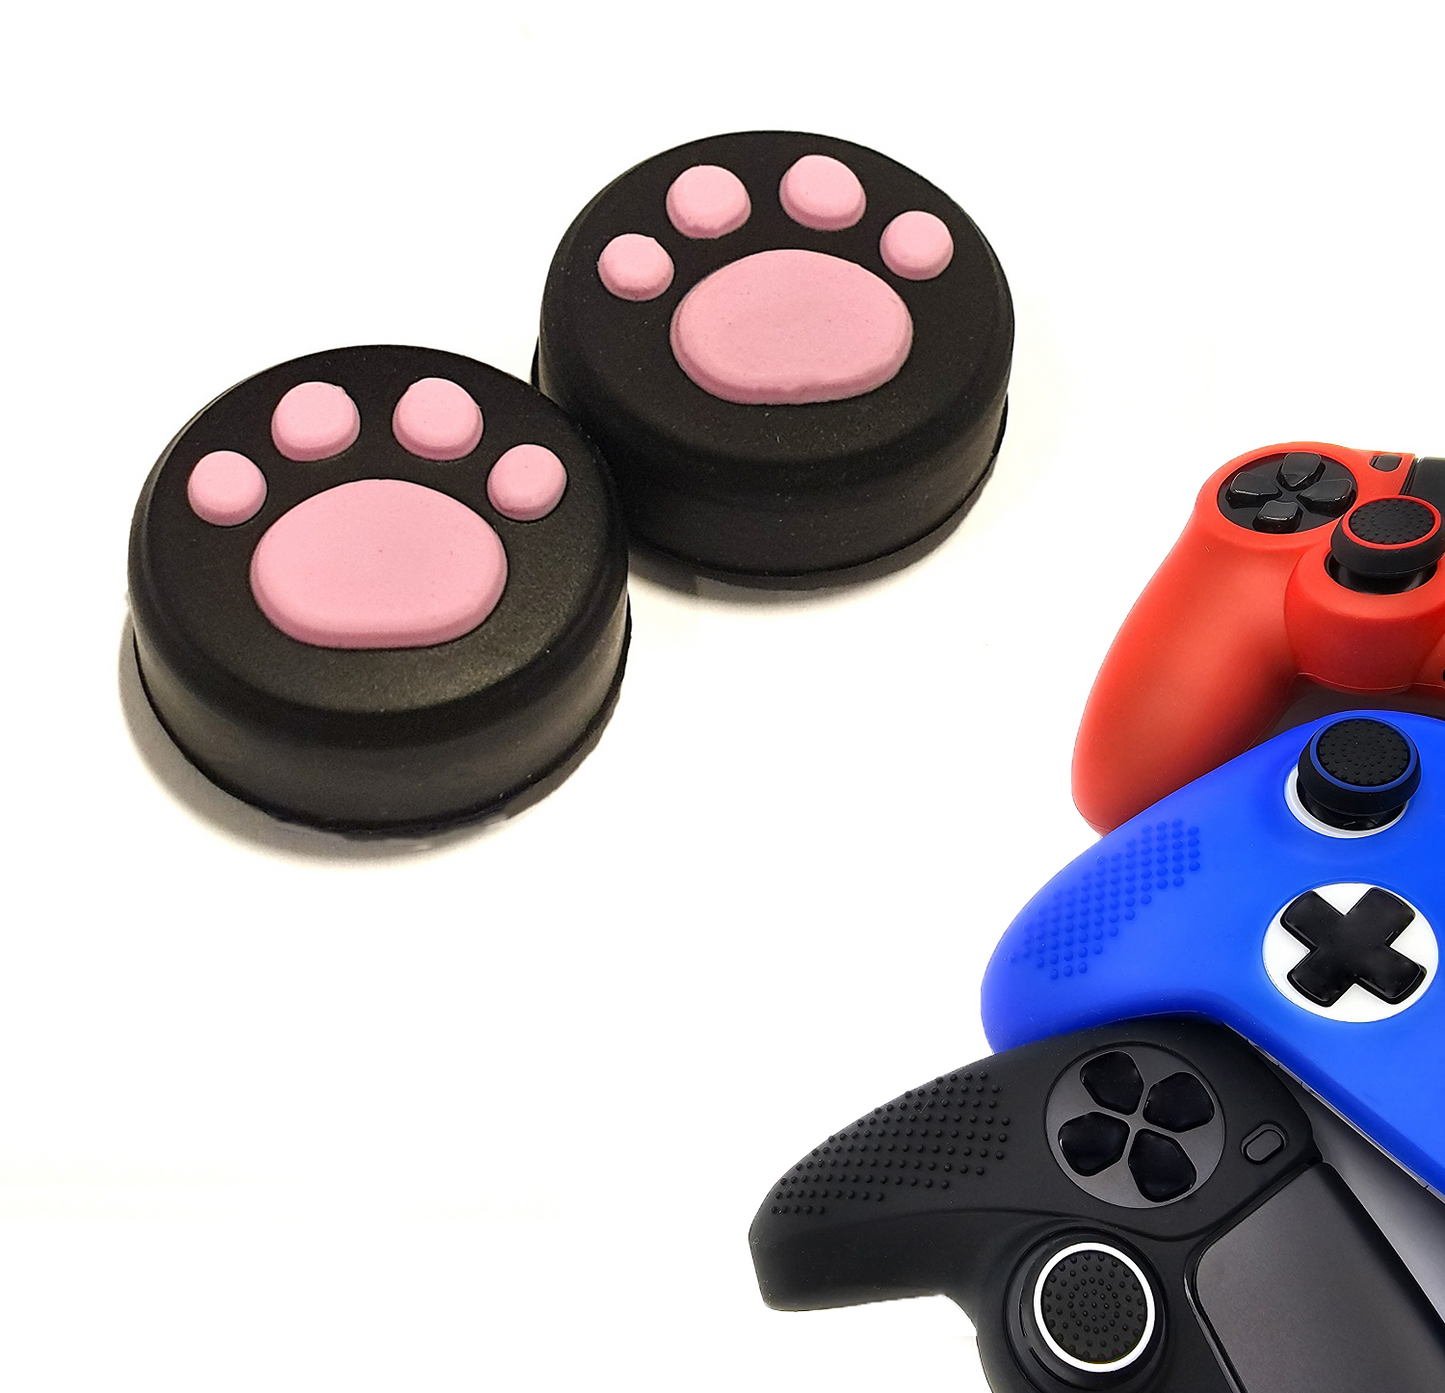 Gaming Thumb Grips | Performance Anti-slip Thumbsticks | Joystick Cap Thumb Grips | Paws - Black with Pink | Accessories suitable for Playstation PS4 PS5 &amp; Xbox &amp; Nintendo Pro Controller